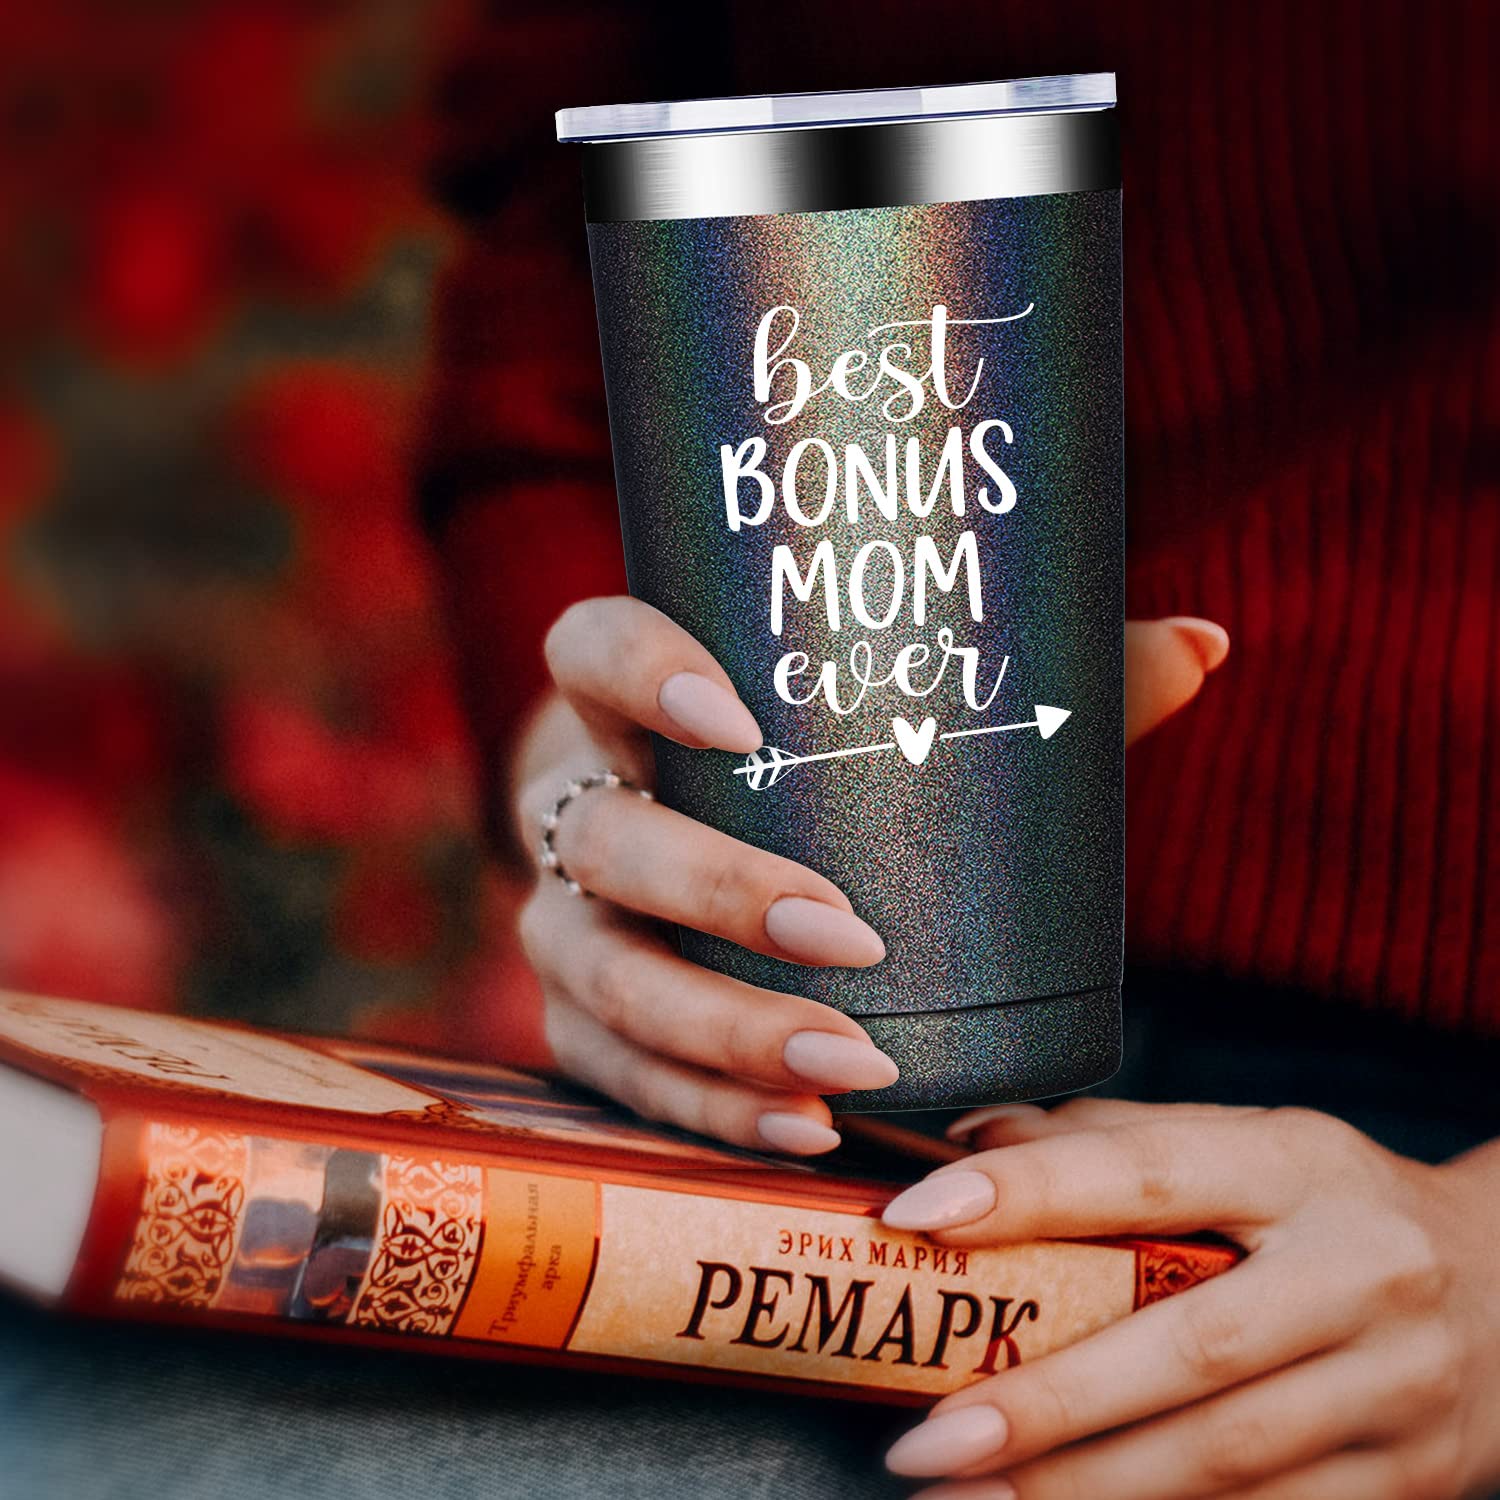 Fufandi Best Bonus Mom Ever Tumbler - Bonus Mom Gifts - Funny Birthday Mothers Day Christmas Gifts for Bonus Mom, Stepmom, Mother in Law from Daughter Son - Tumbler Cup 20oz